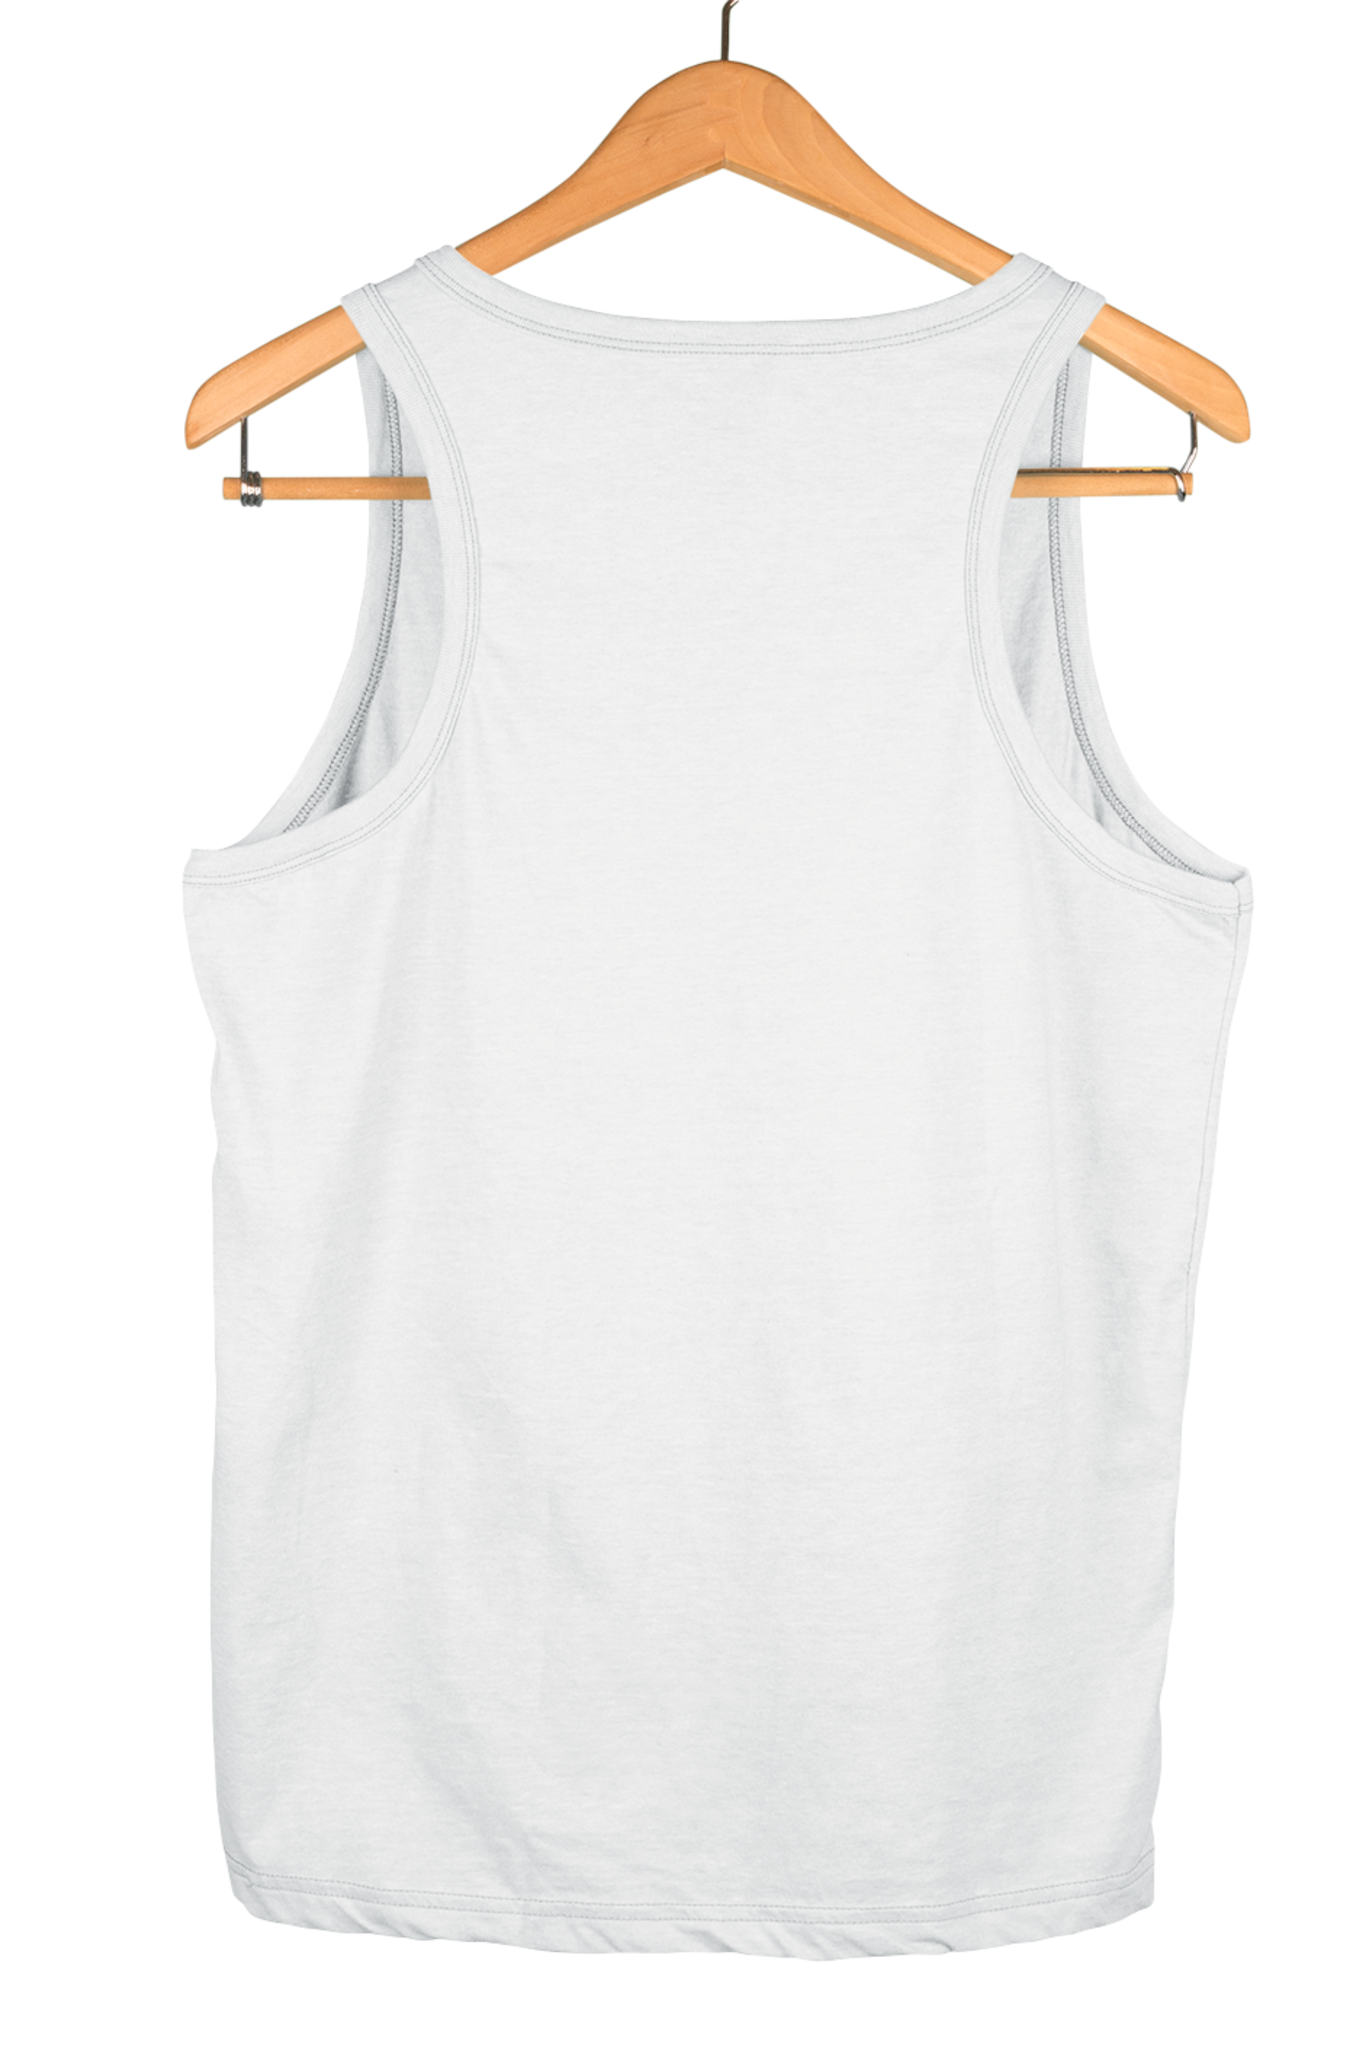 Women's Tank Top: Mountains are Calling